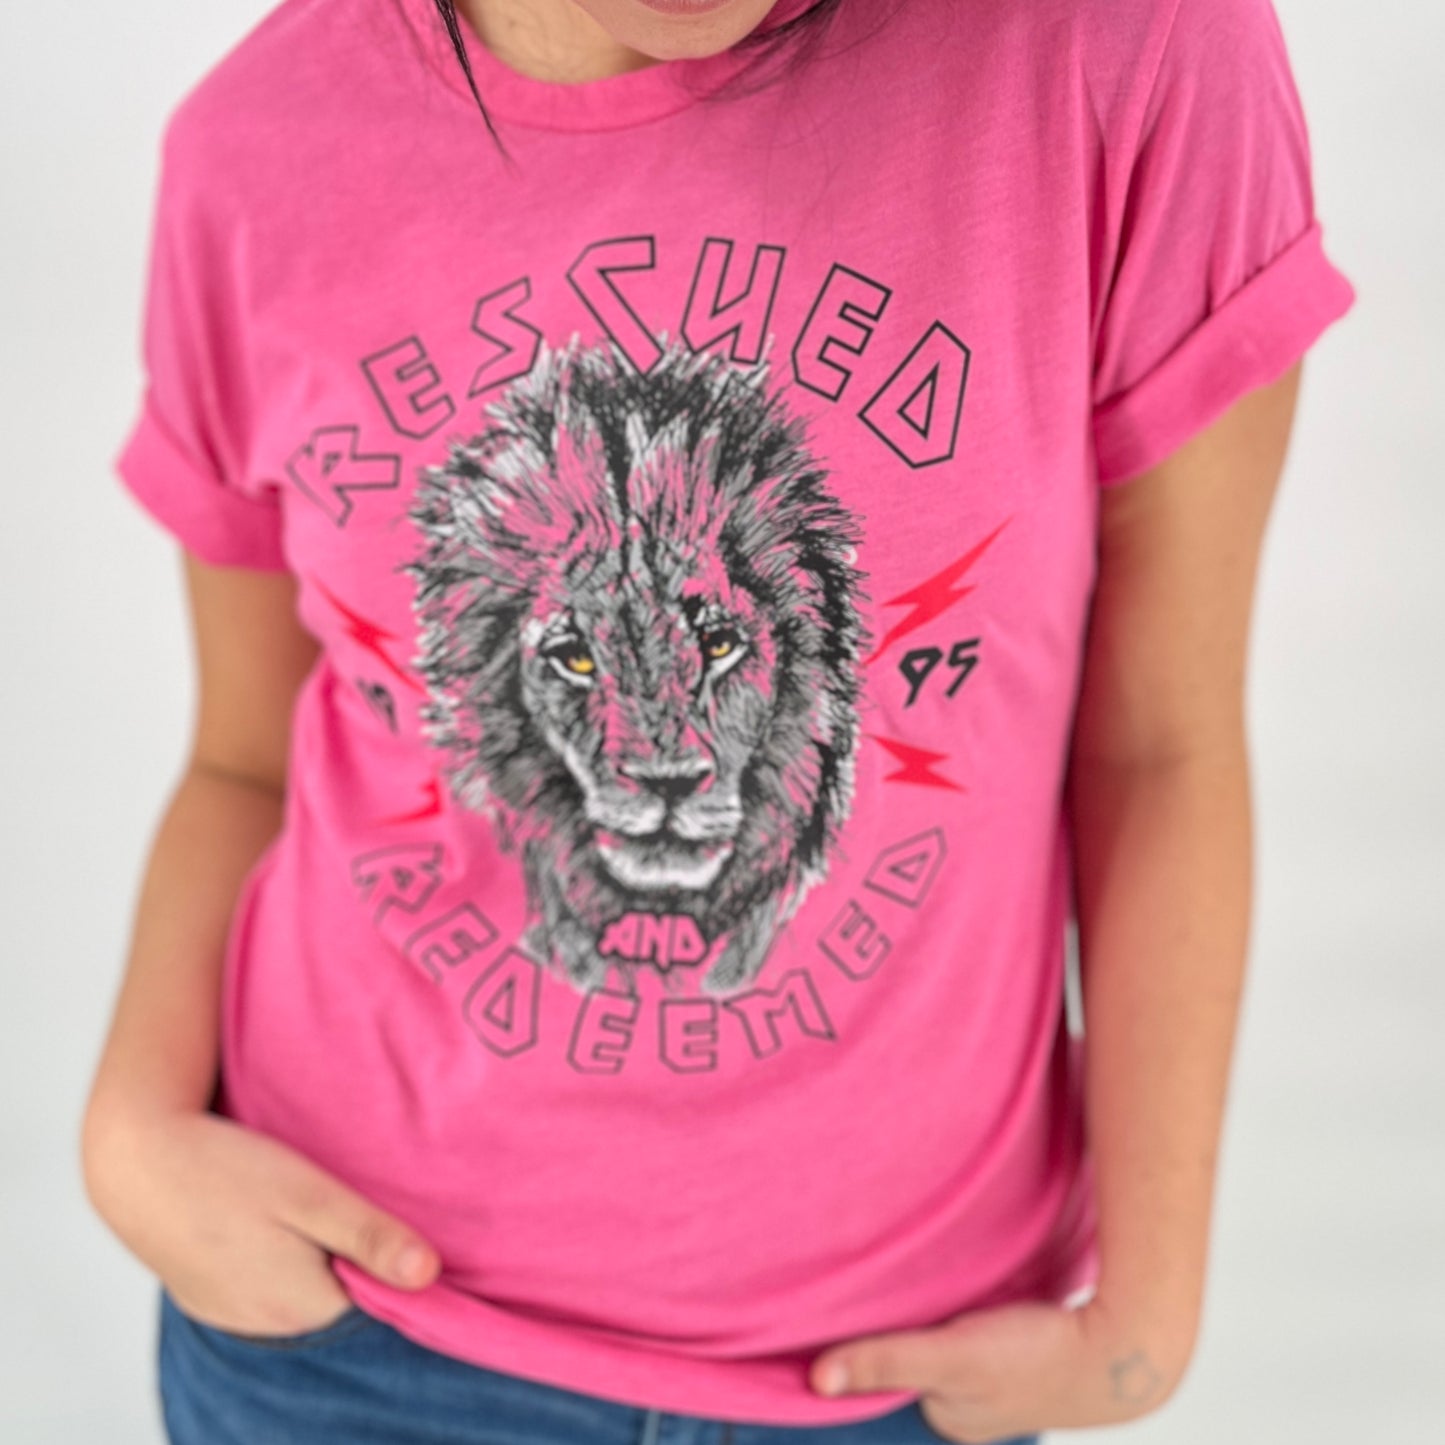 Rescued and Redeemed tee